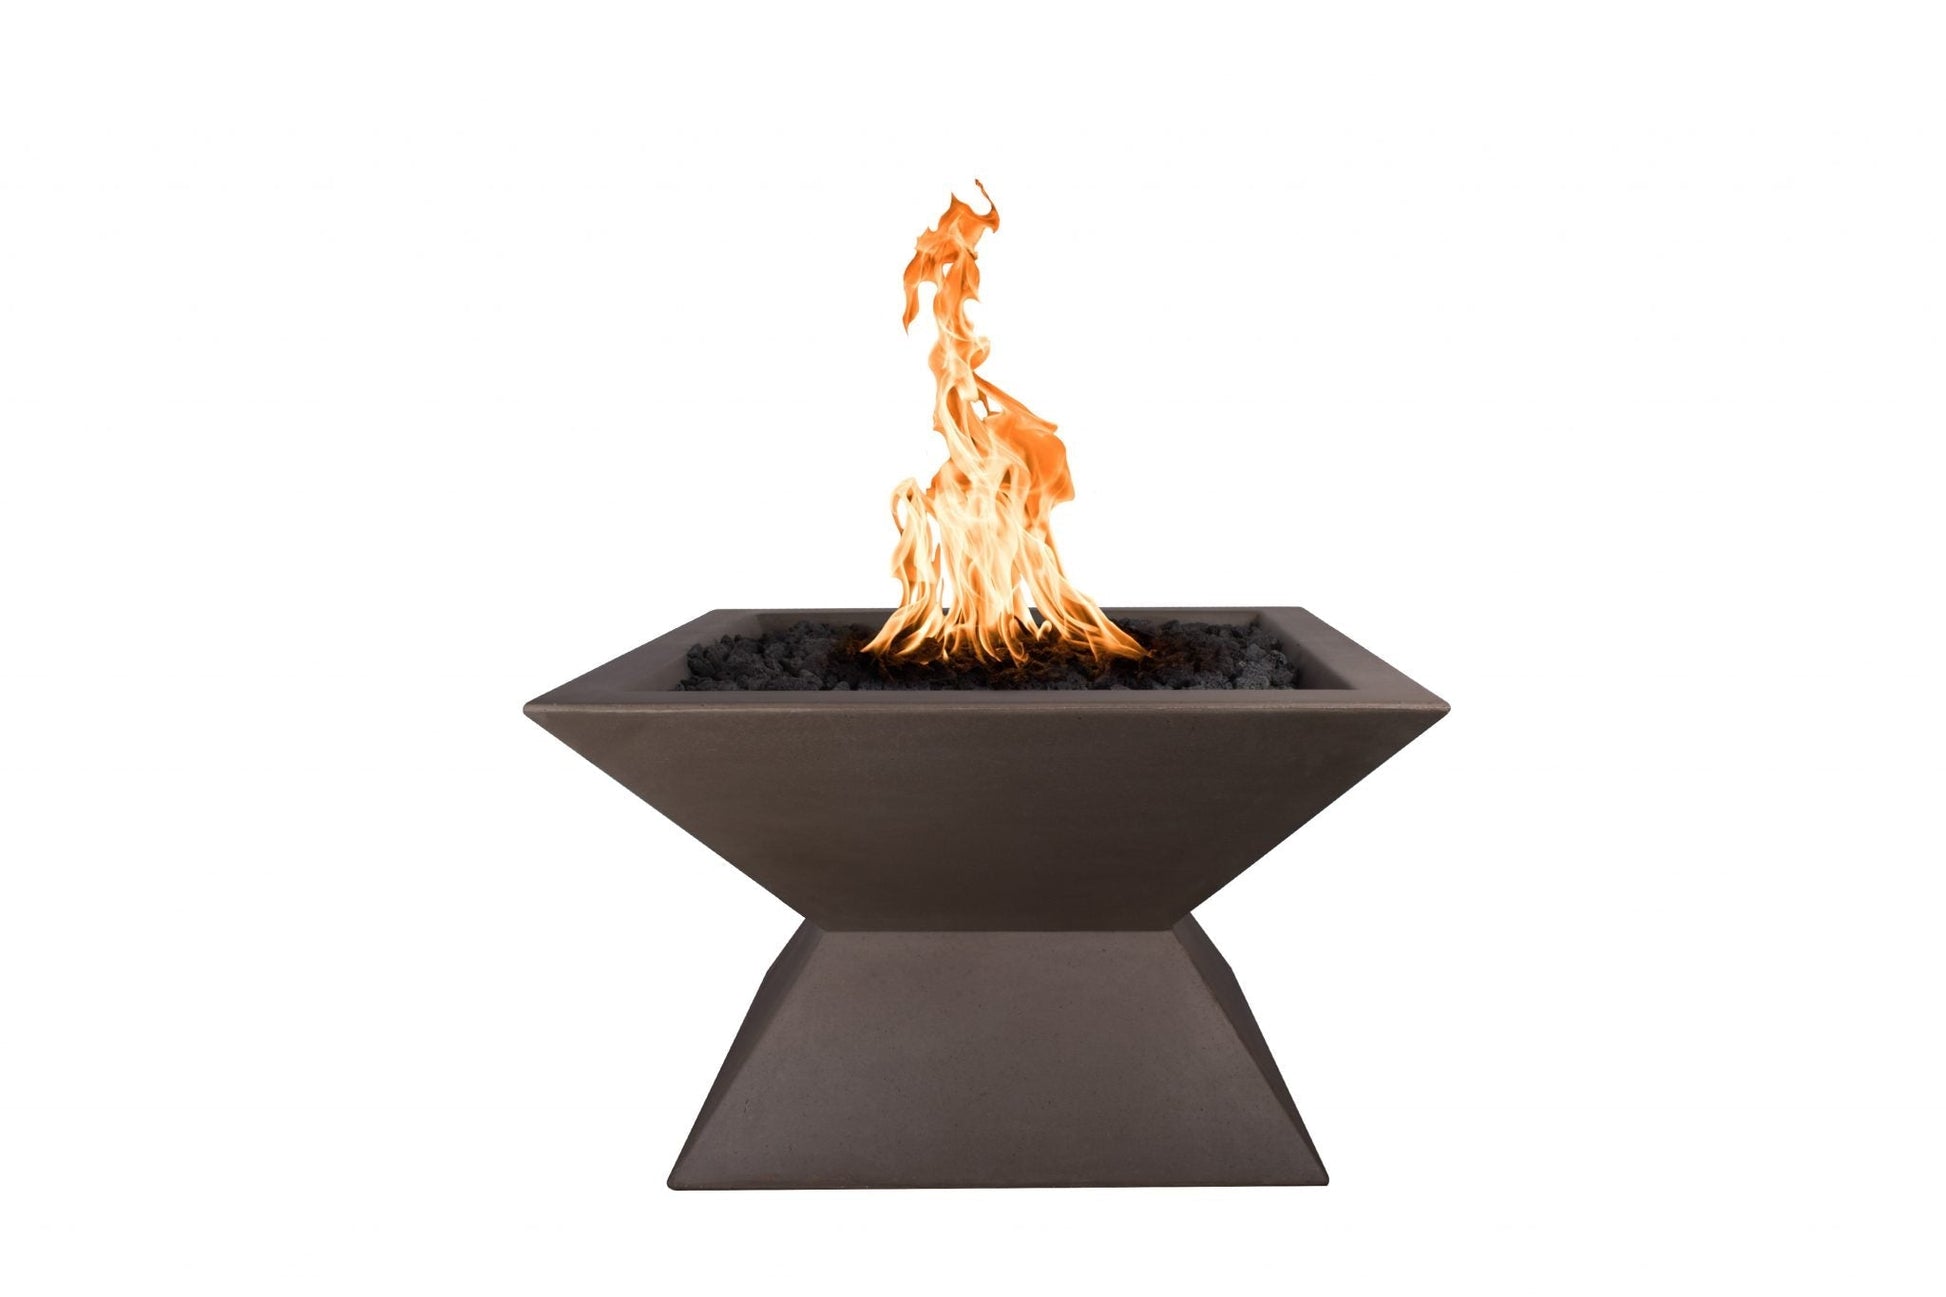 The Outdoor Plus Square Uxmal 30" Vanilla GFRC Concrete Liquid Propane Fire Pit with 12V Electronic Ignition